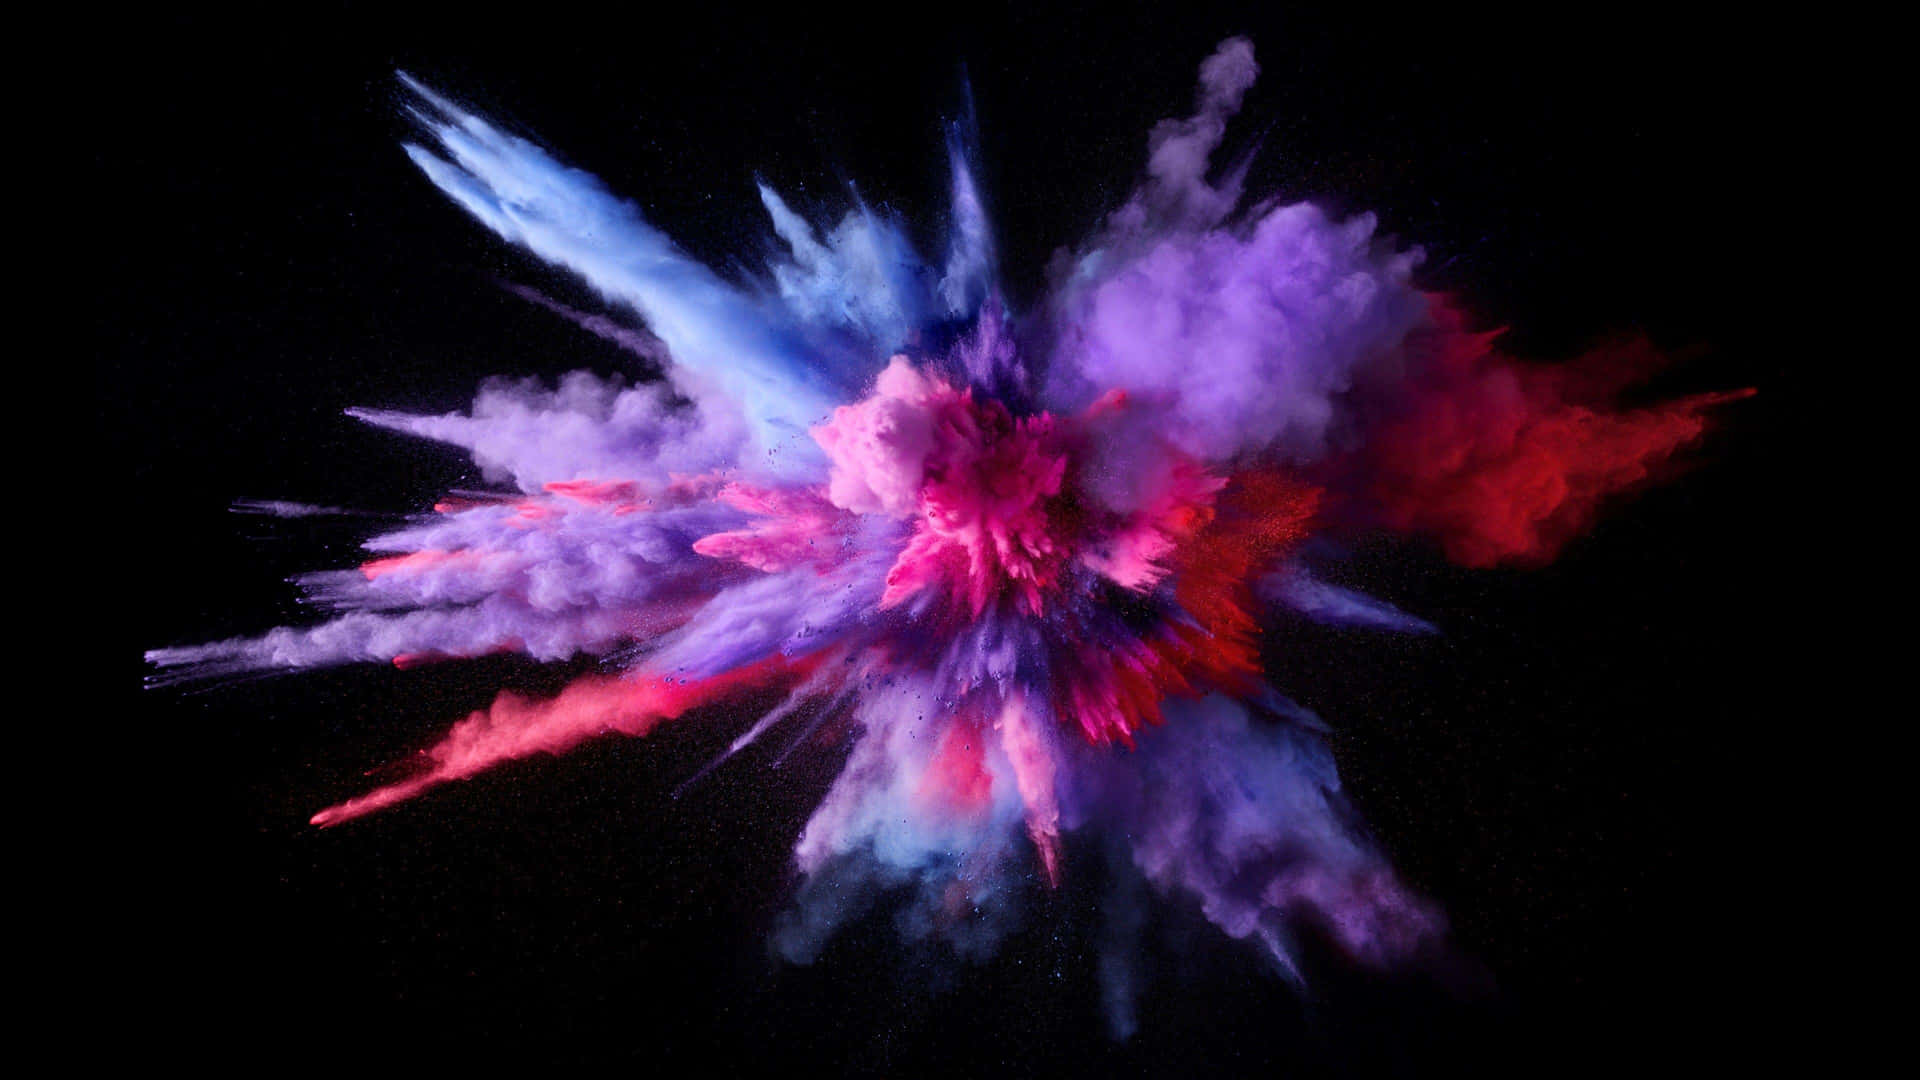 A Colorful Powder Explosion On A Black Background Wallpaper